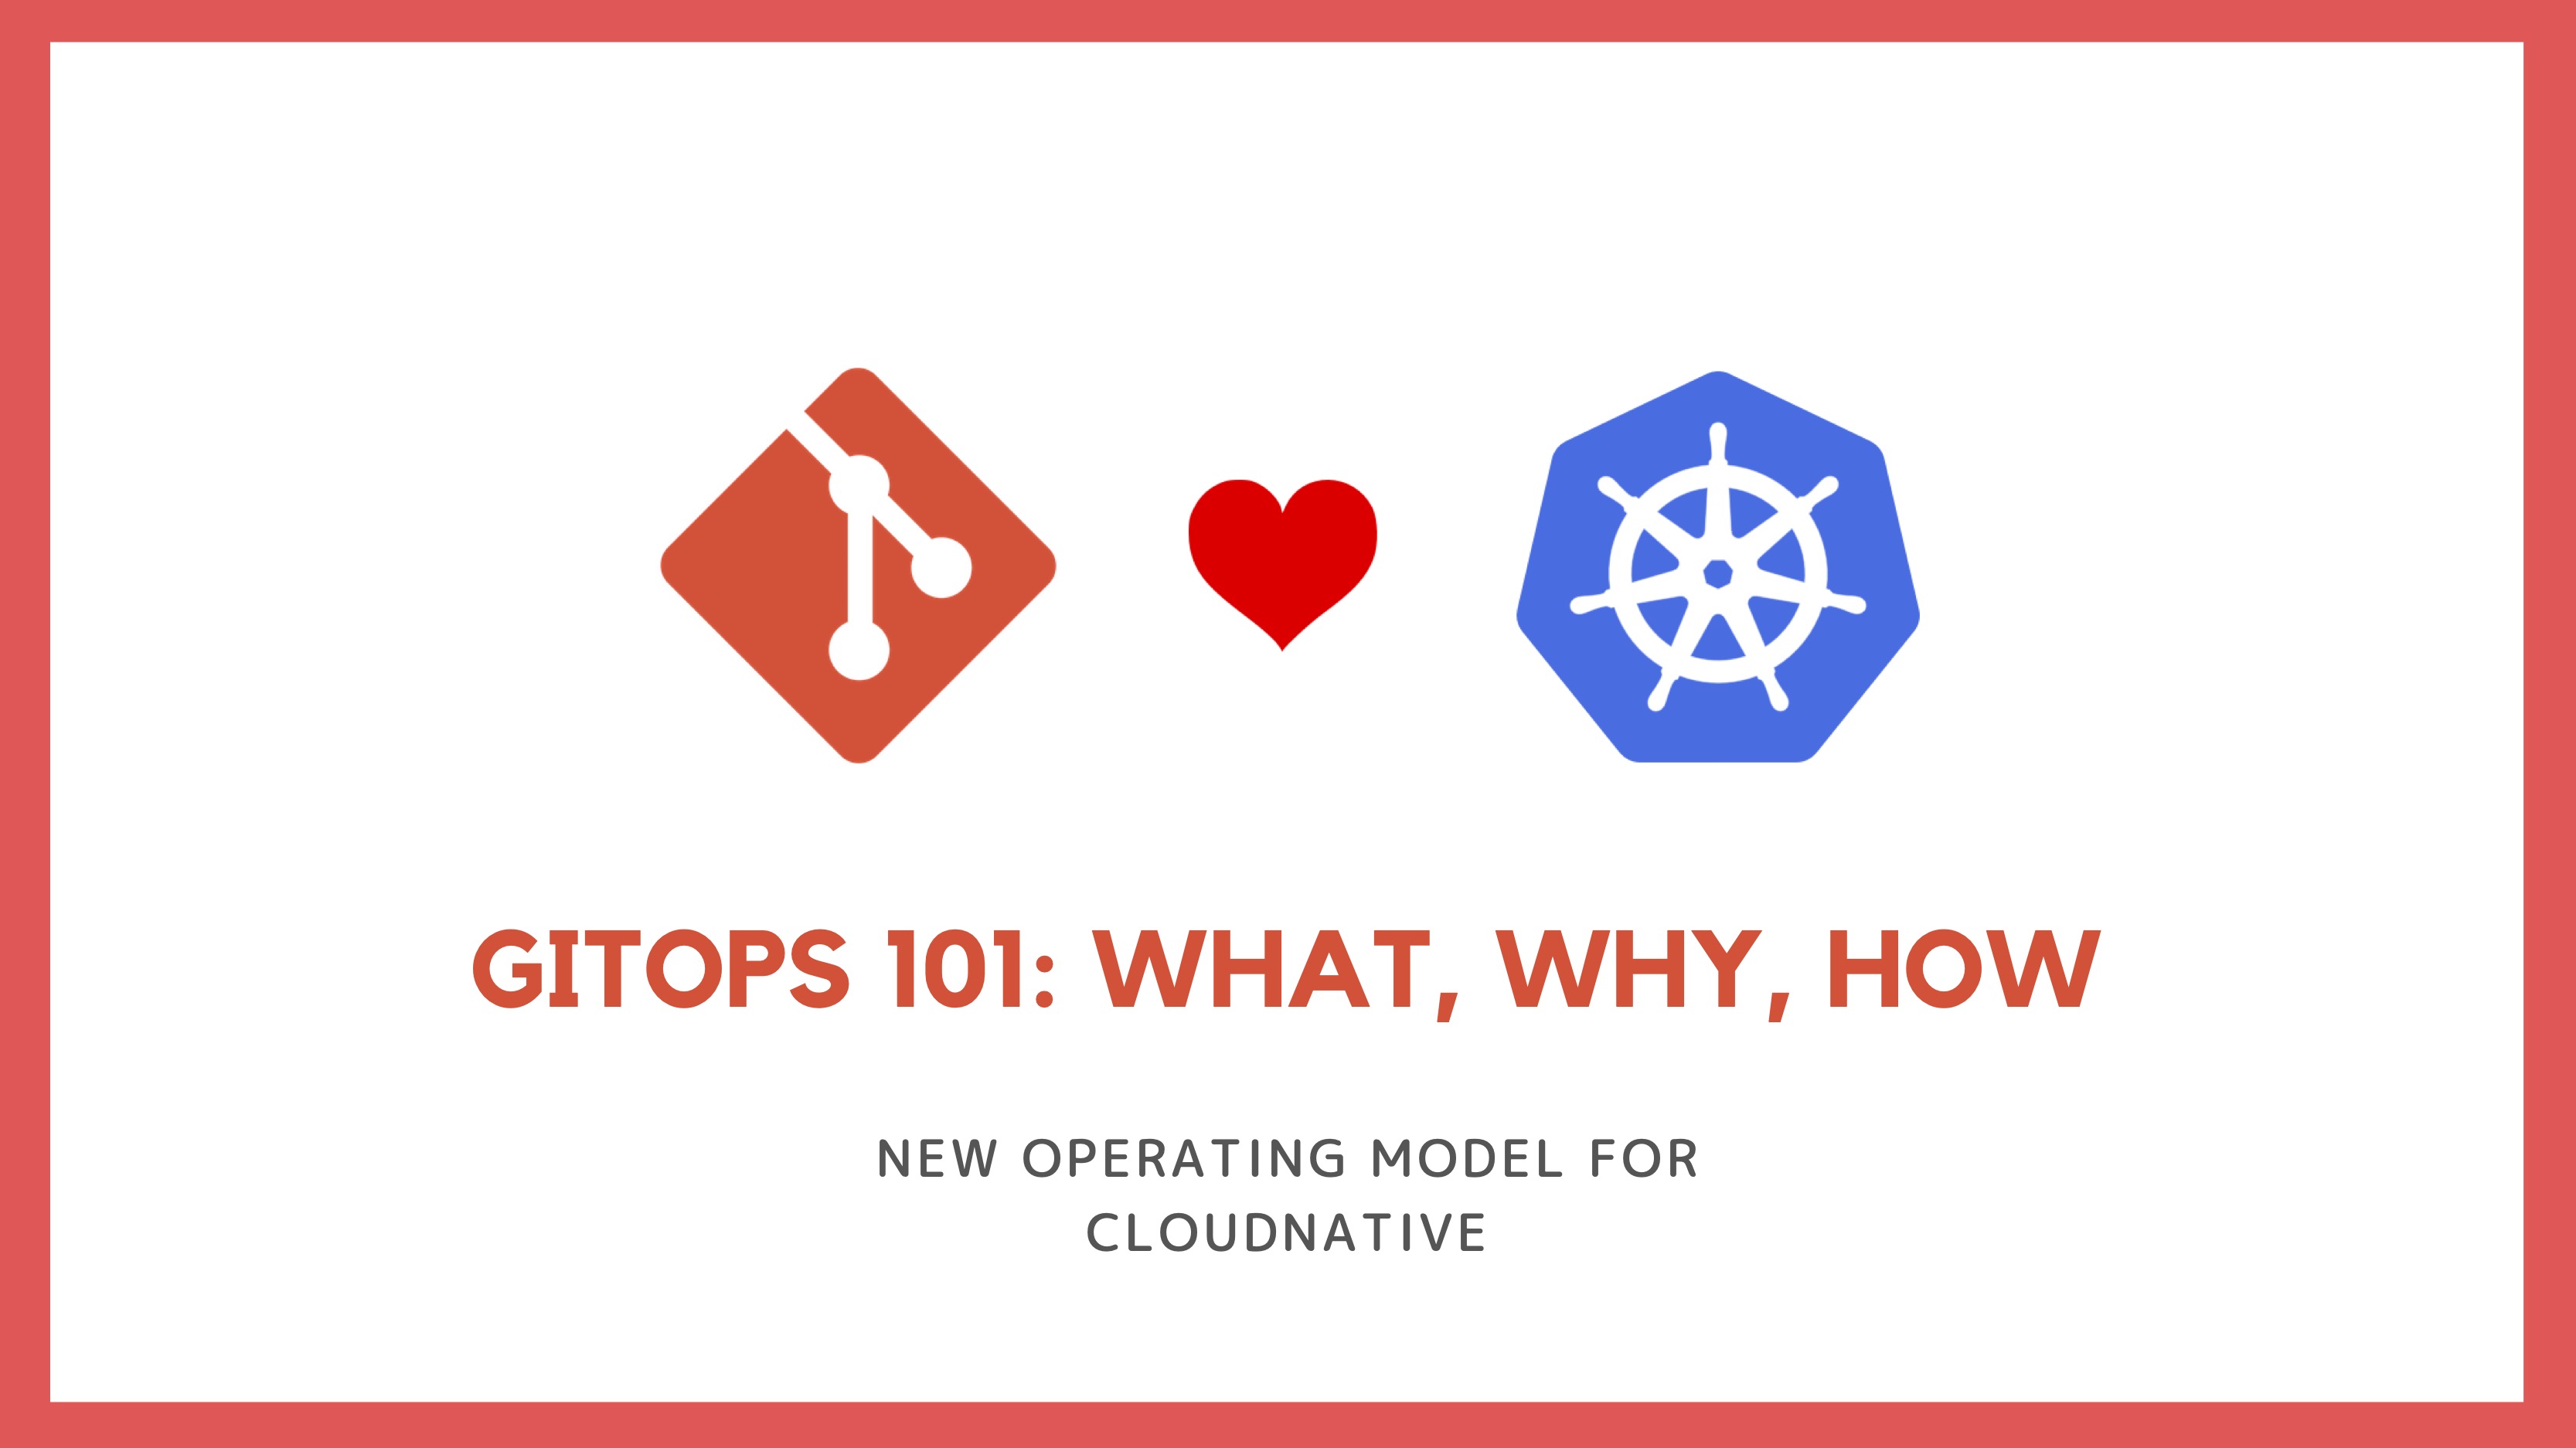 GitOps 101: What’s it all about?